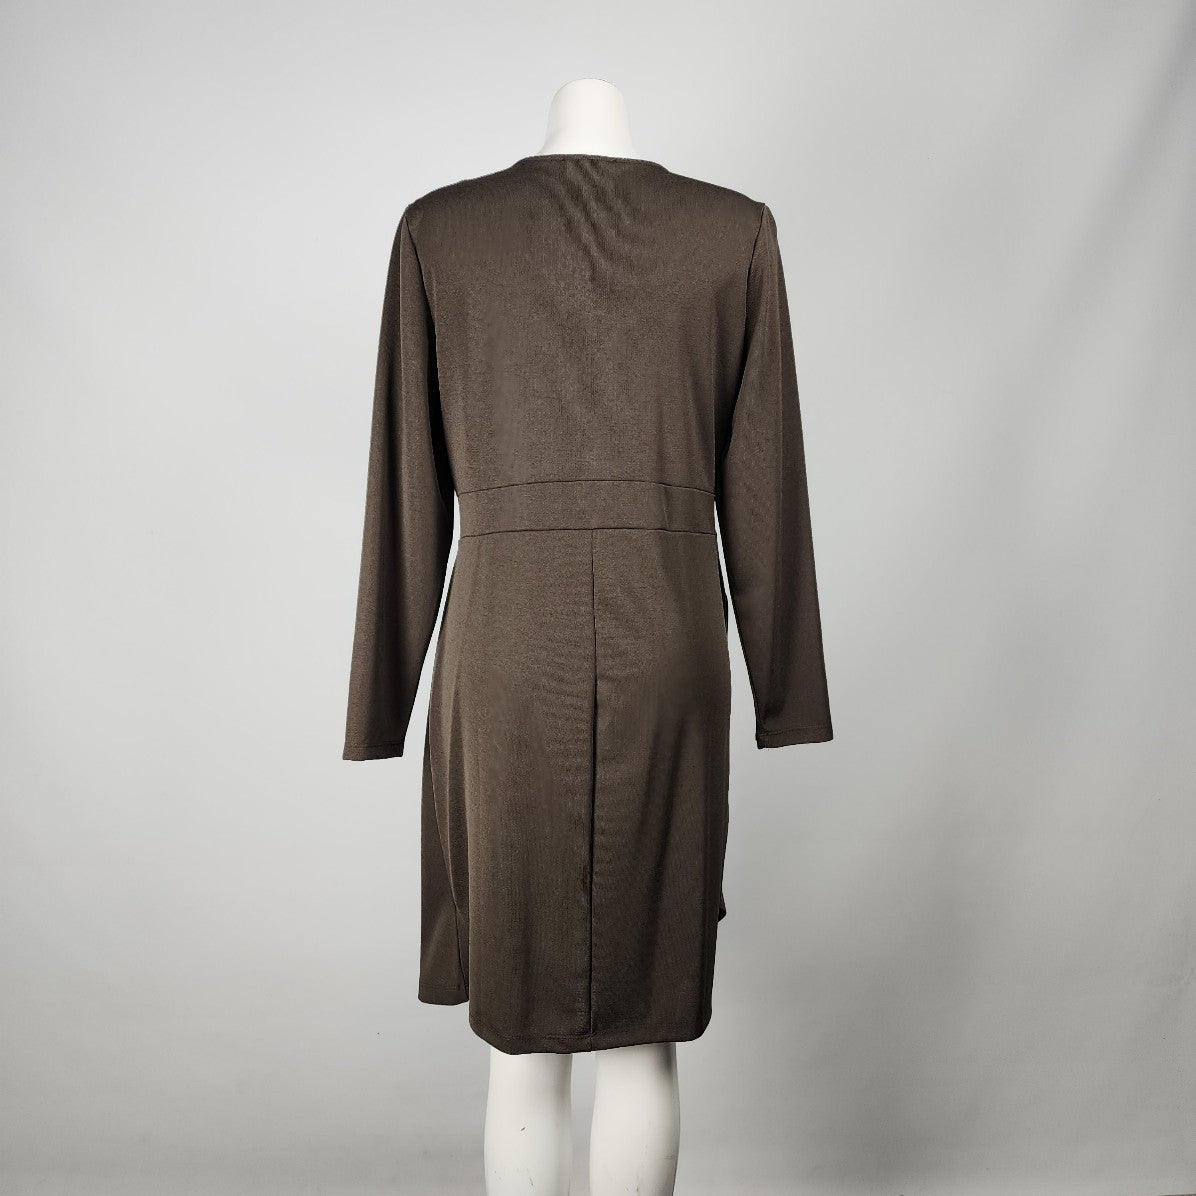 Dynamite Brown Long Sleeve Ruched Knee Length Dress Size L/XL